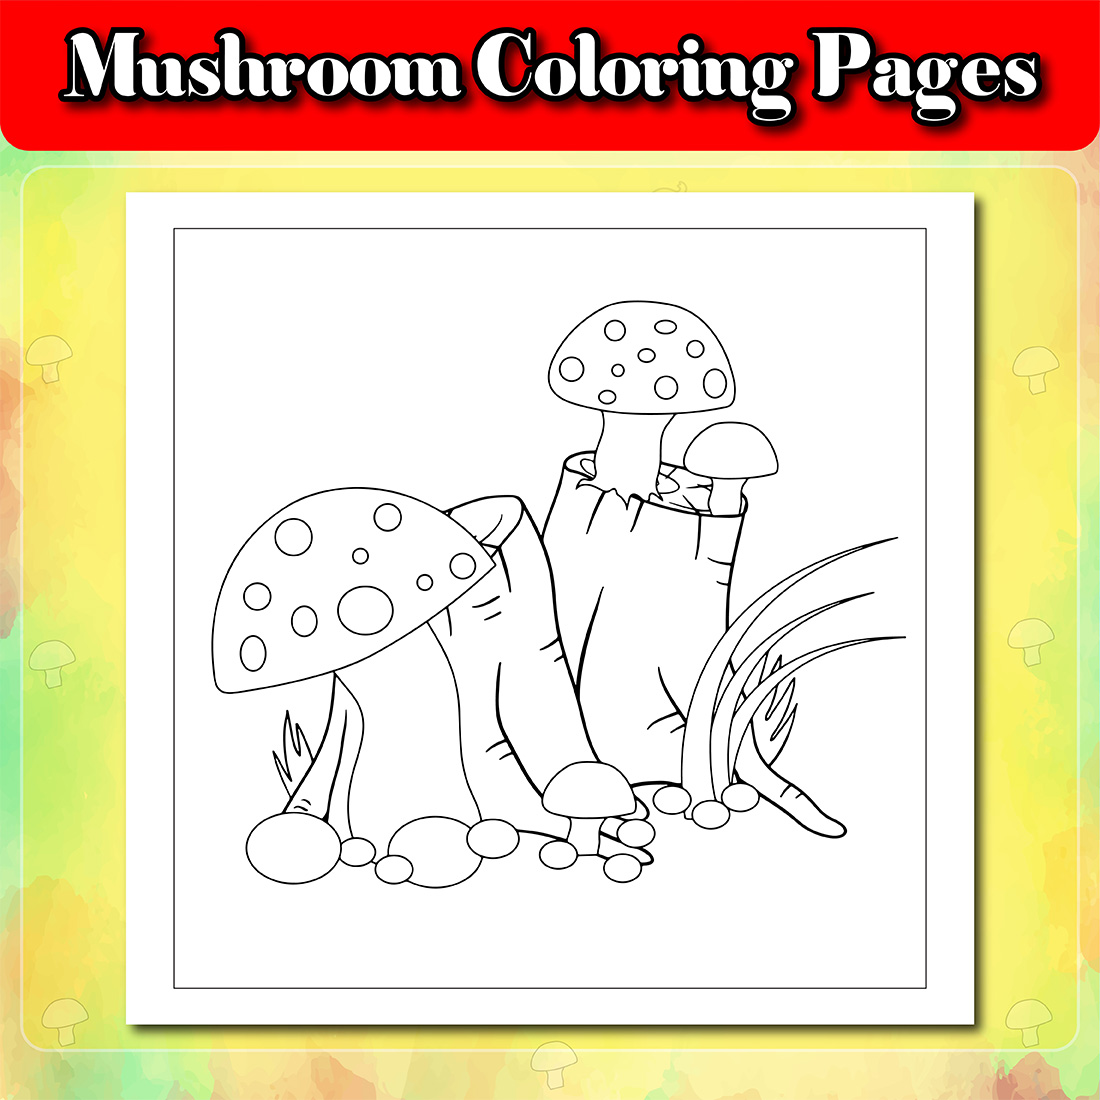 Mushroom Coloring Pages examples.